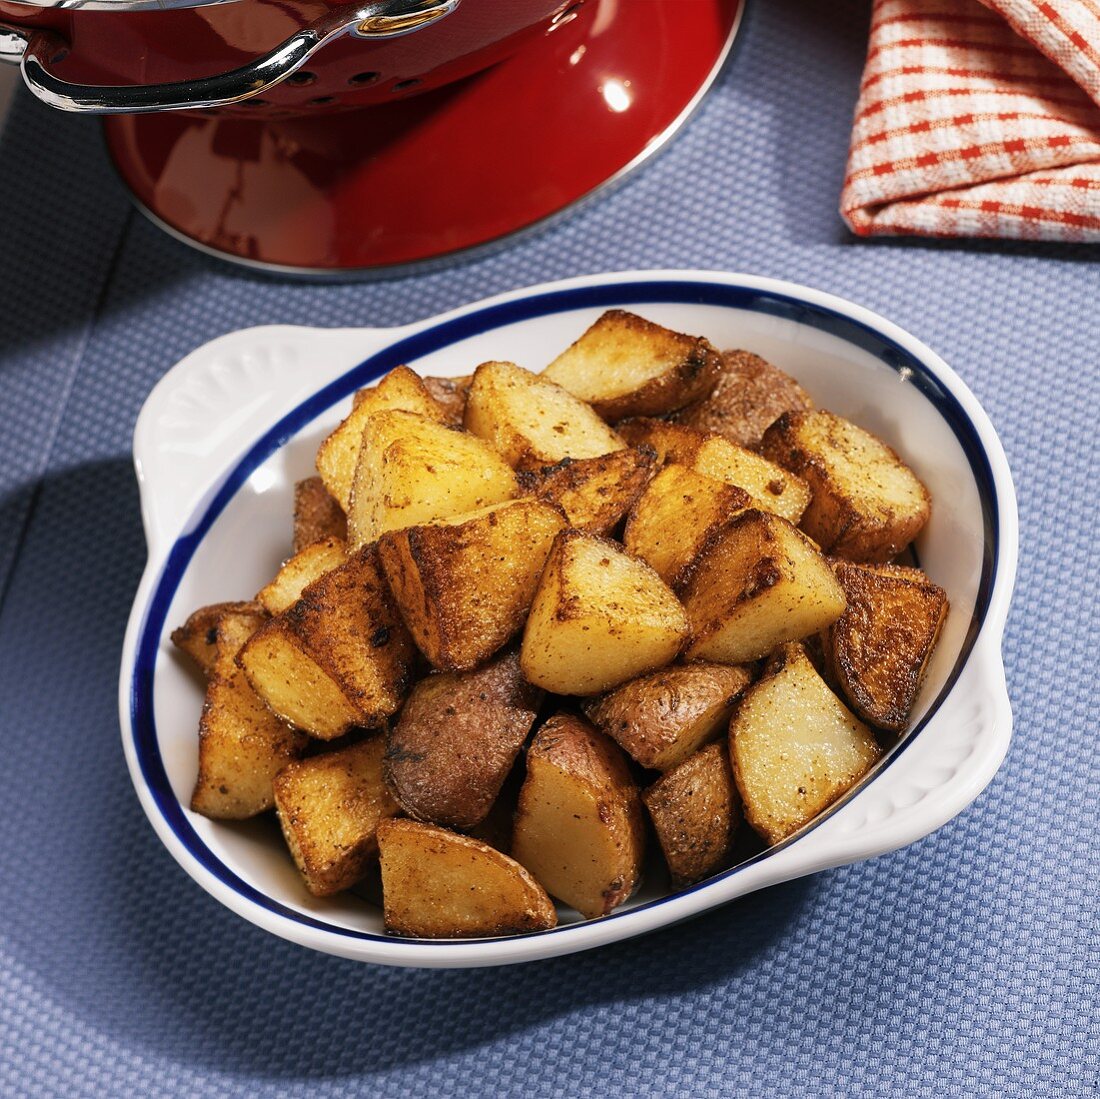 Home Fried Red Skinned Potatoes